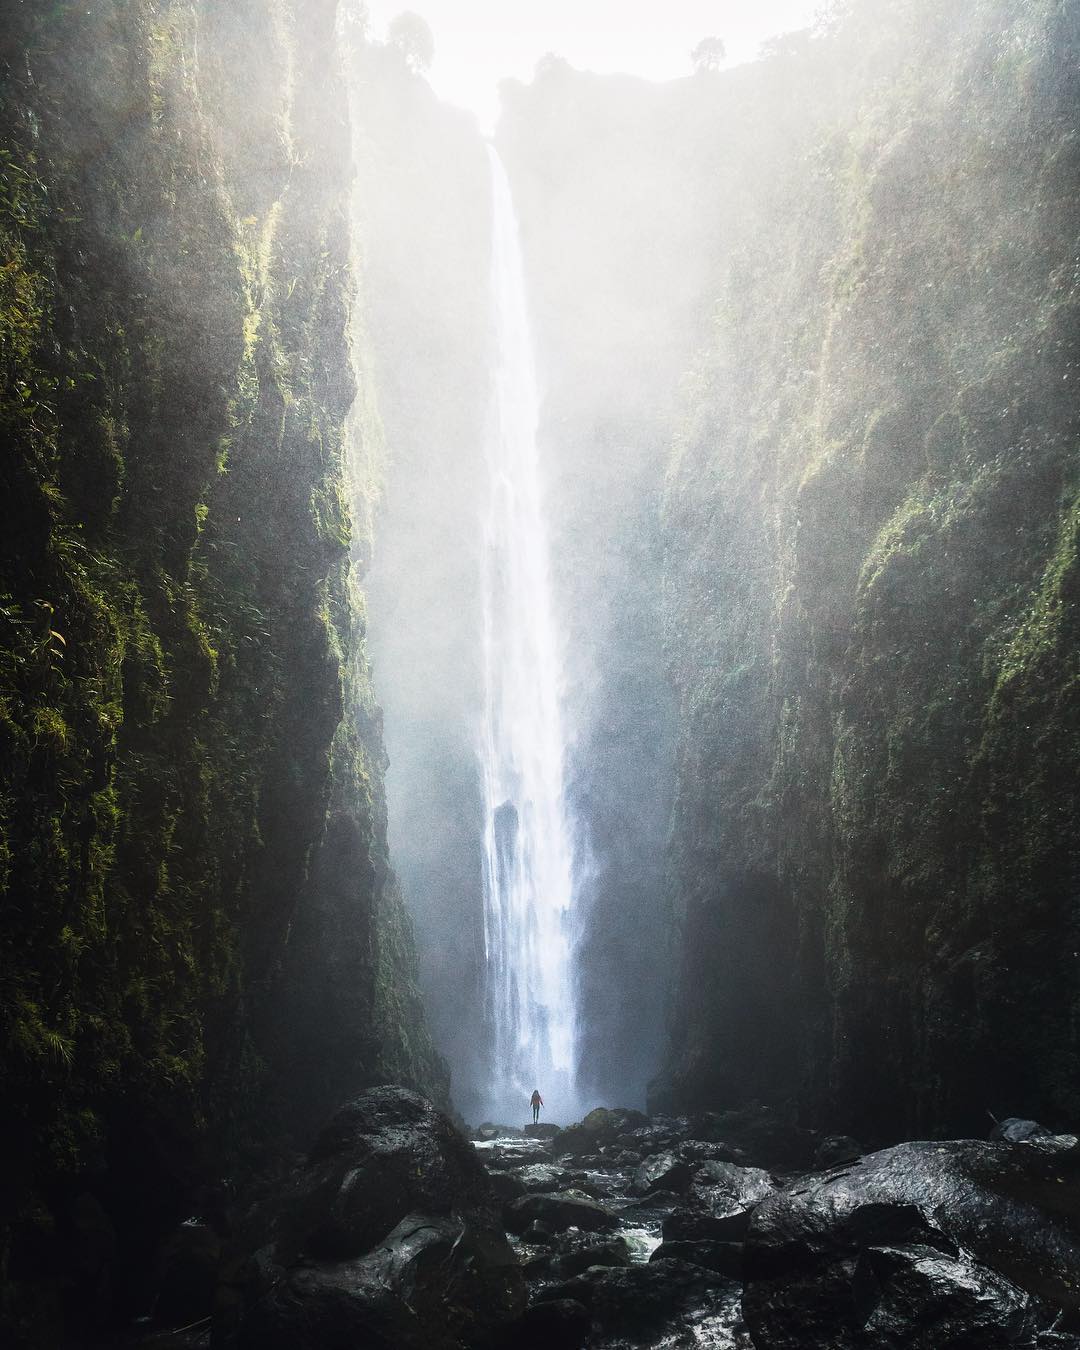 400ft waterfall - Maui Ultimate Travel Guide